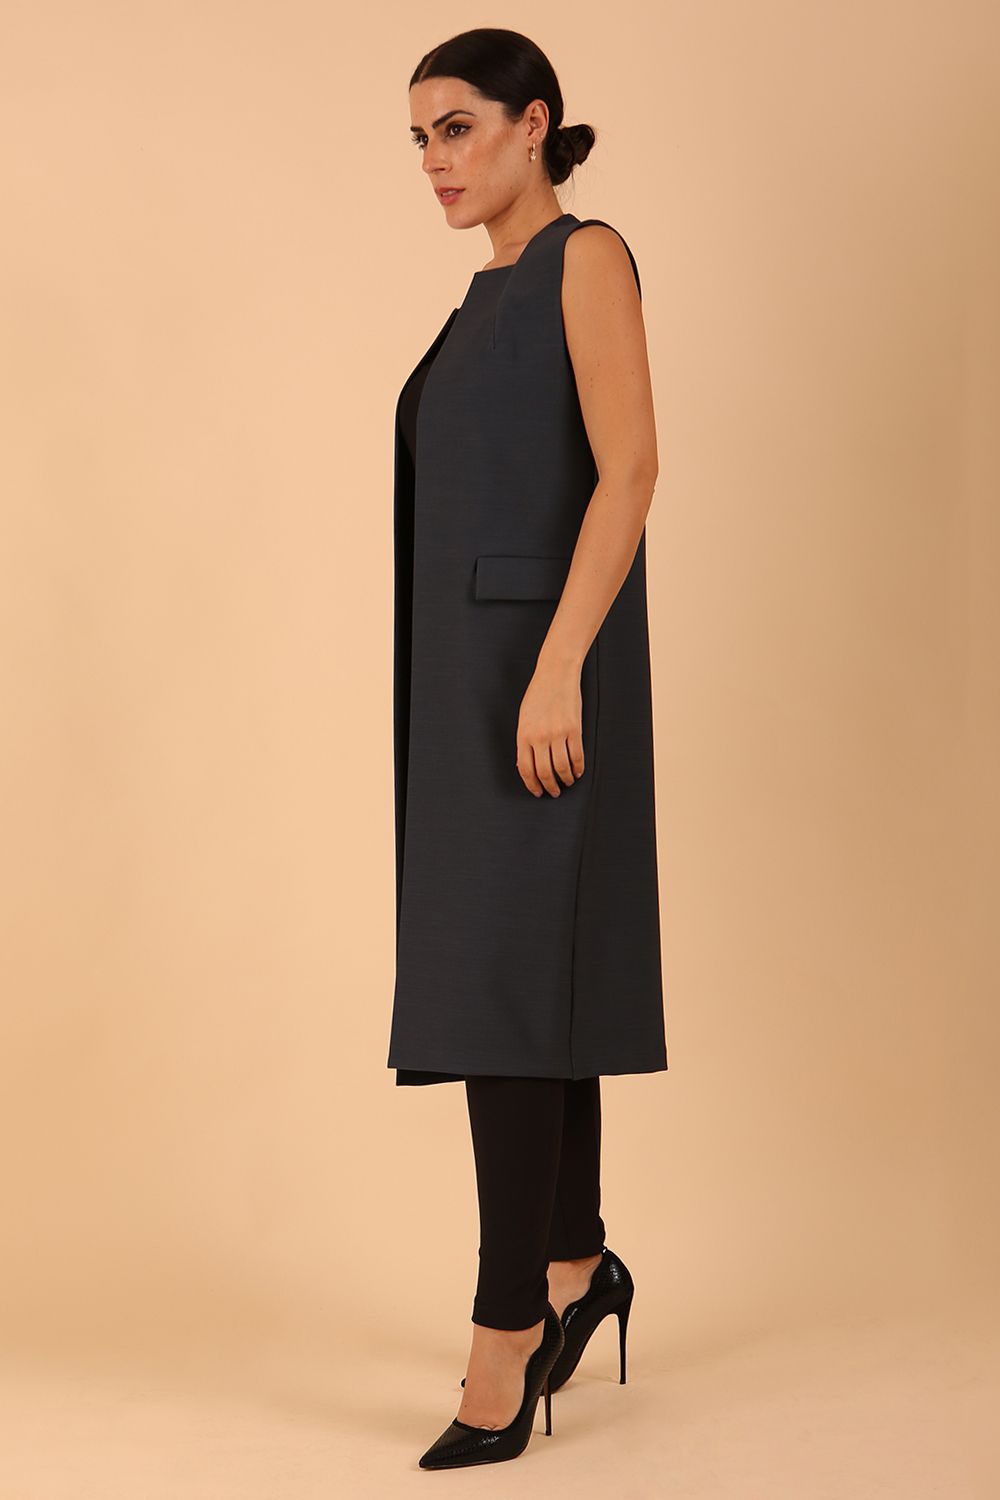 model wearing a divacatwalk Seed Harvard Sleeveless Coat midi length in Slate Grey colour front side